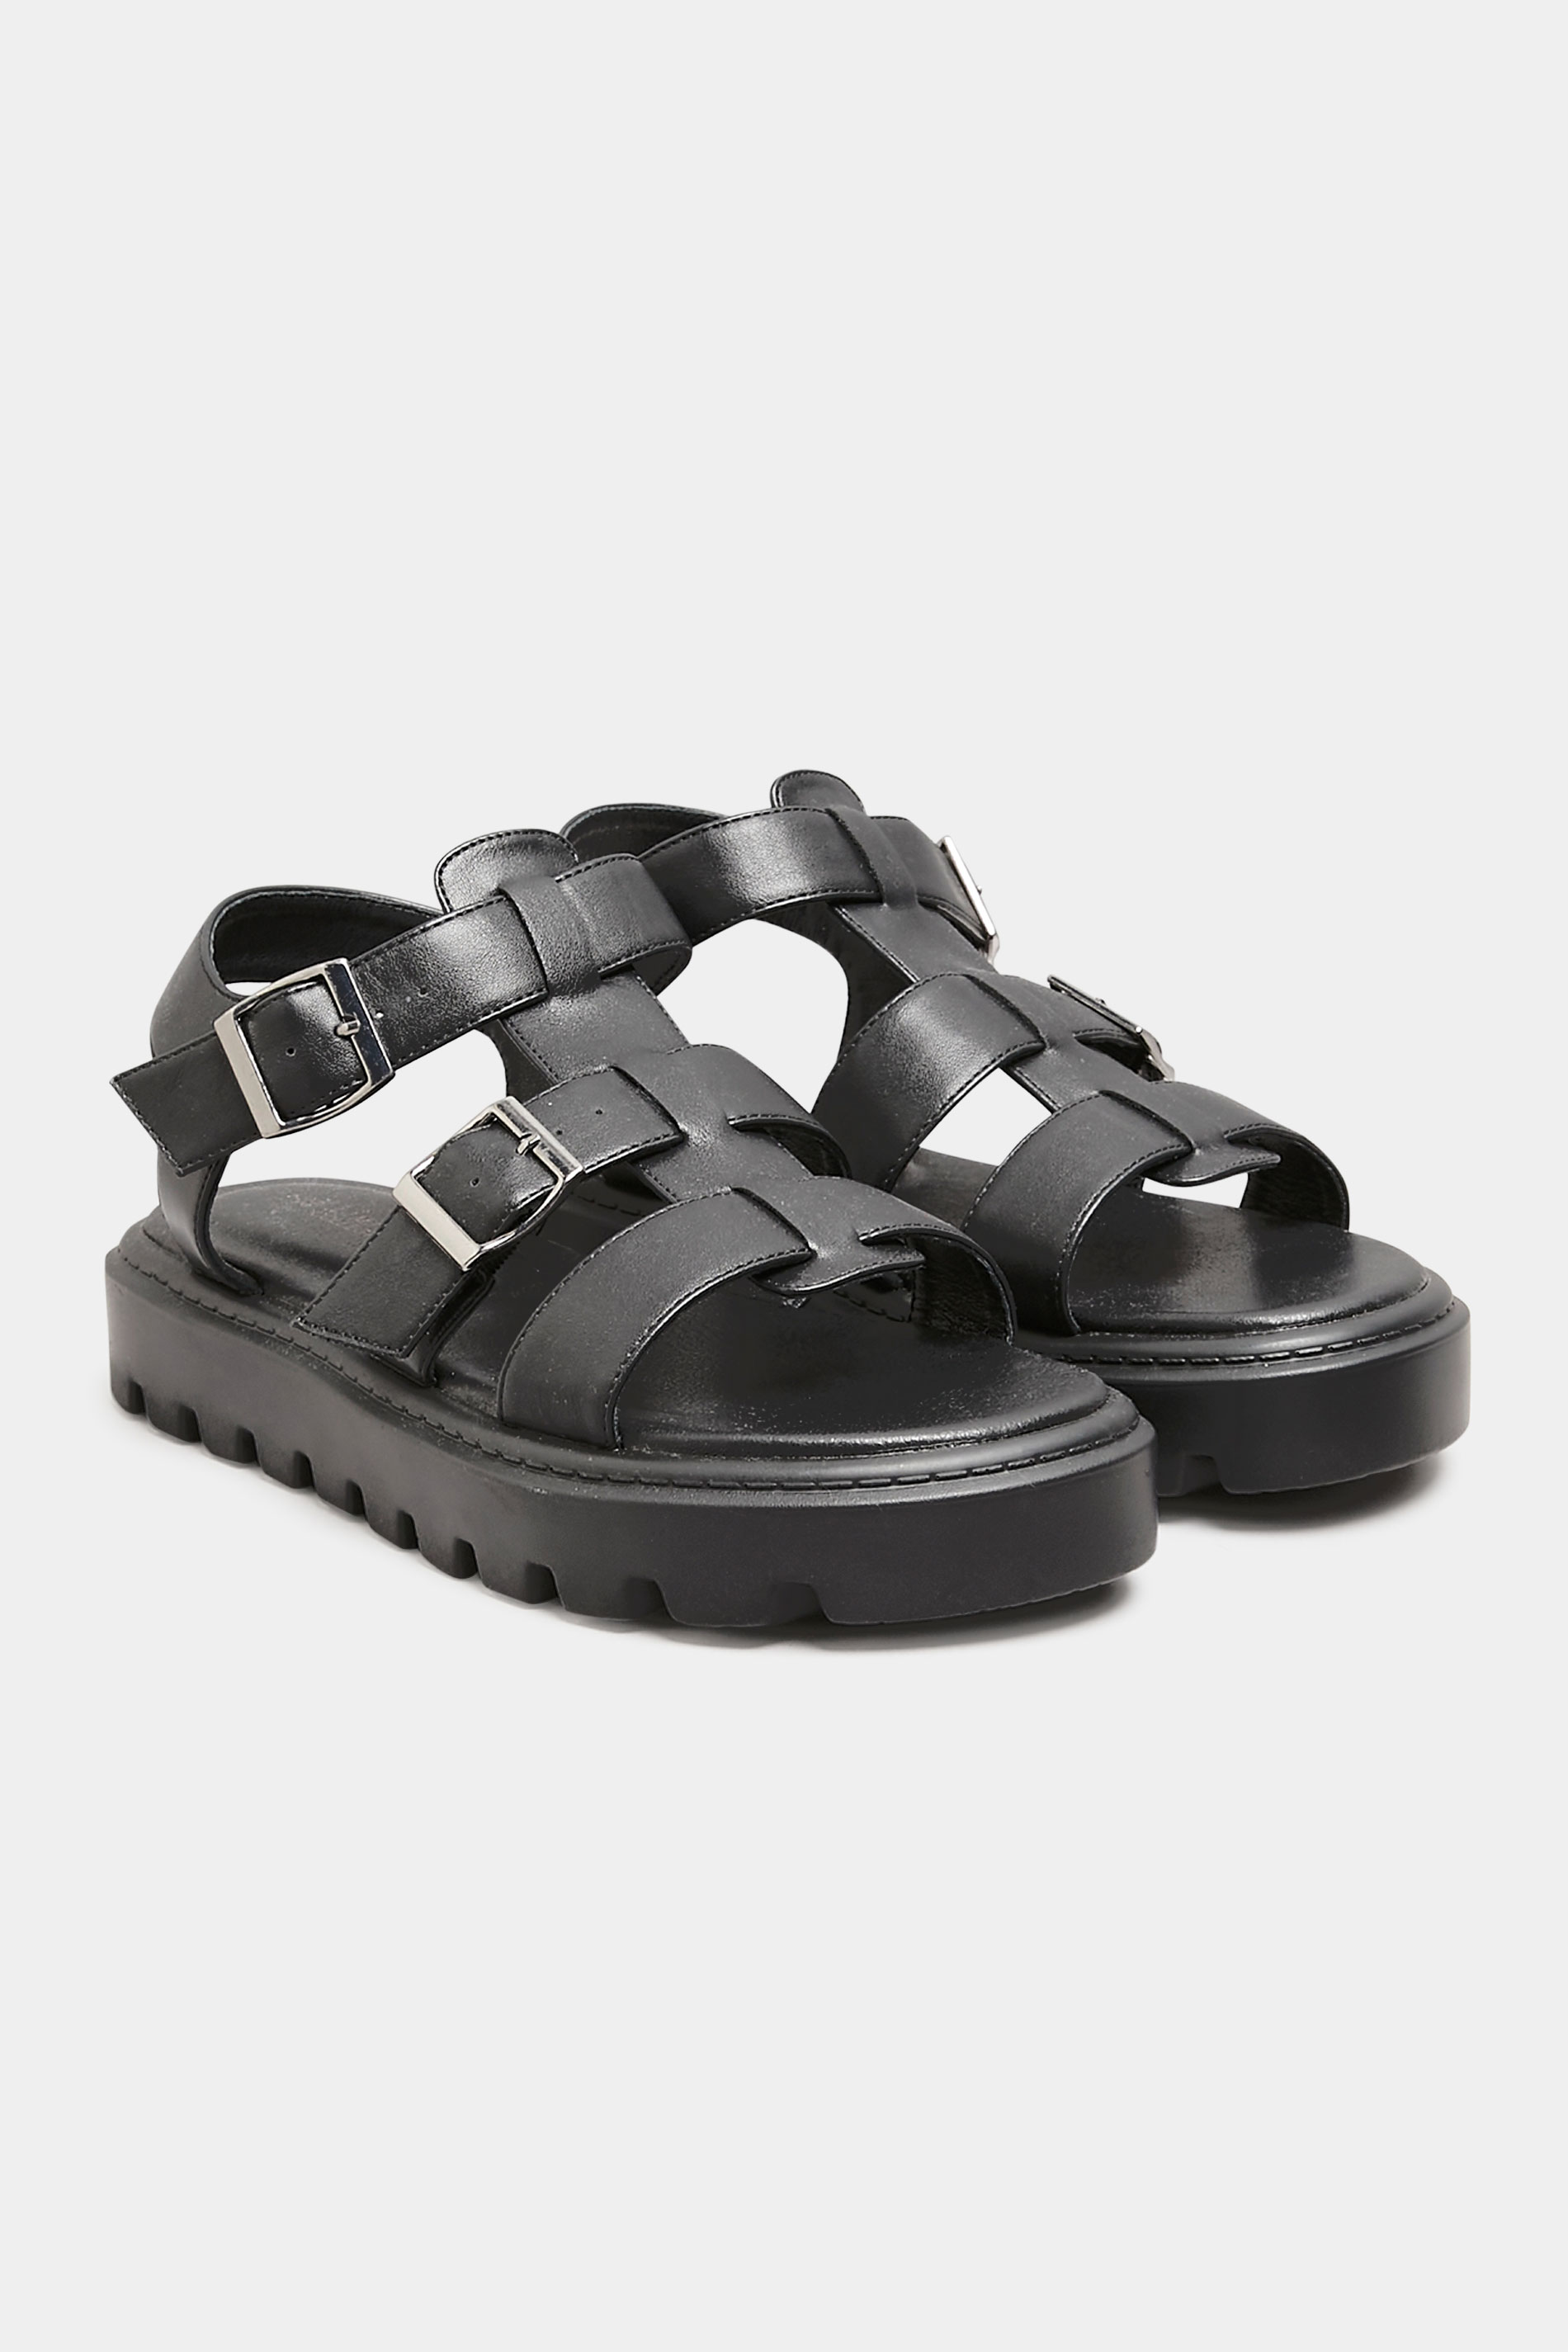 Chaussures Pieds Larges Sandales Pieds Larges | LIMITED COLLECTION - Spartiates Plateformes Noires Pieds Extra Larges EEE - DZ78667